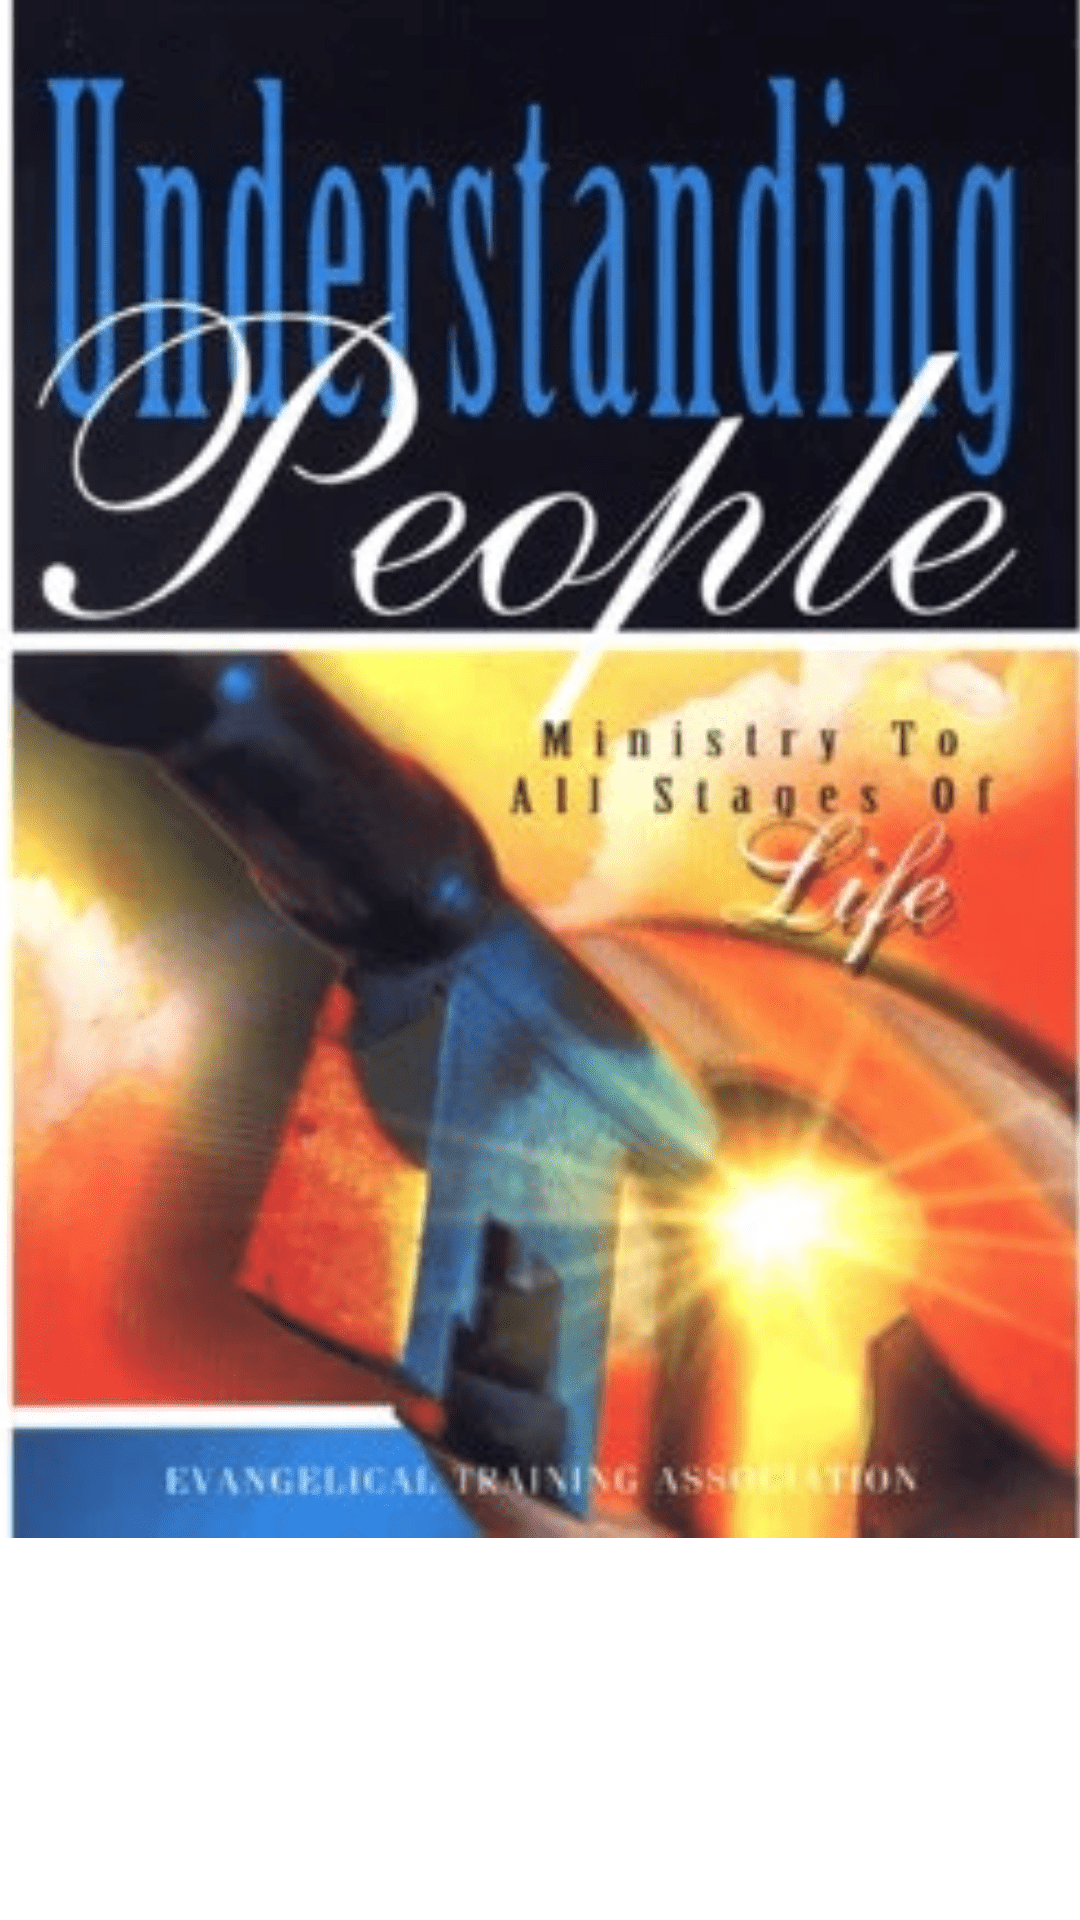 Understanding People : Ministry to All Stages of Life